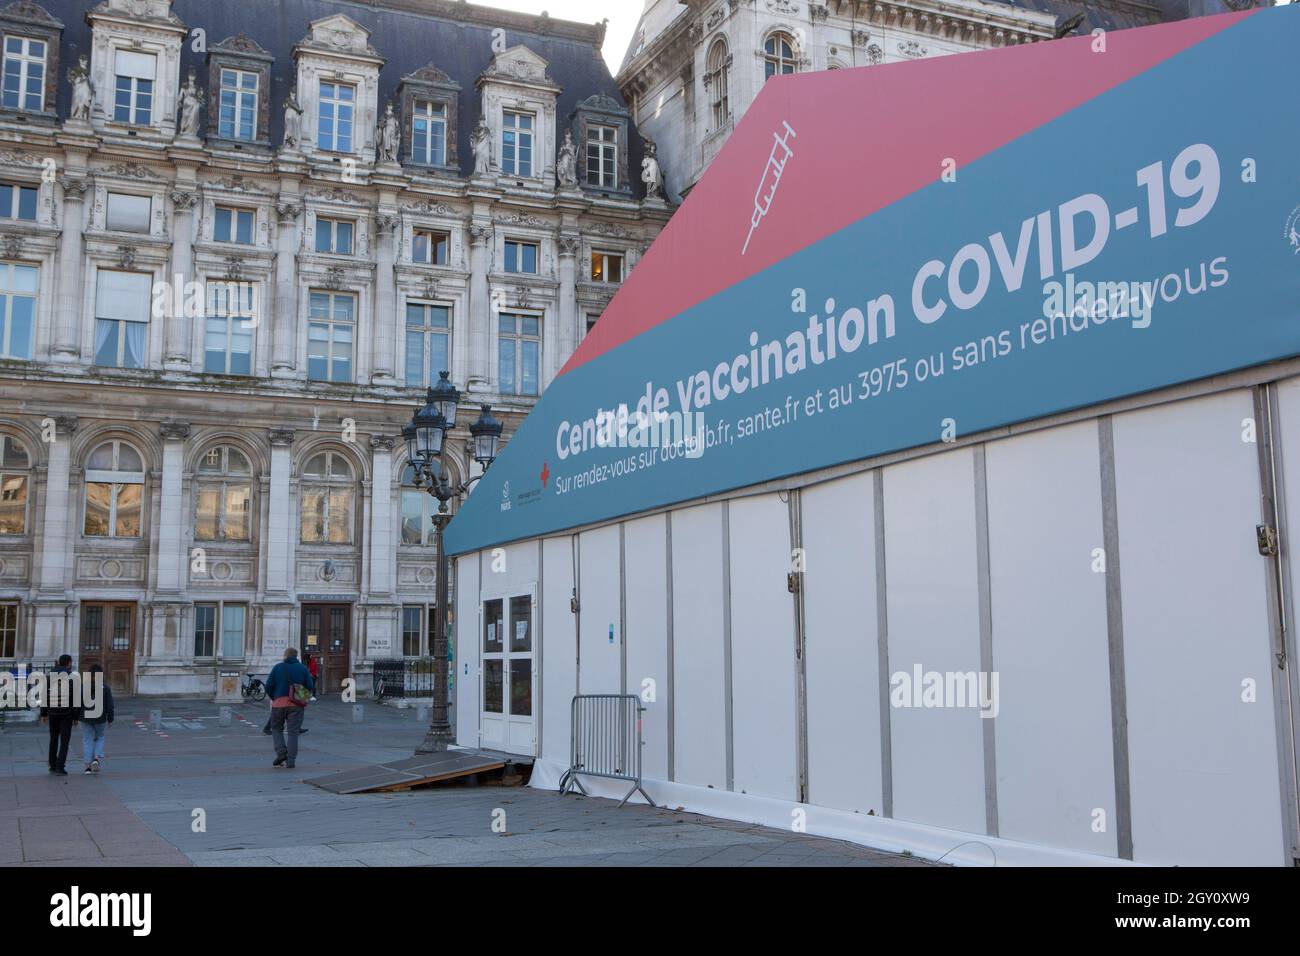 Paris, France, 4 October 2021: A vaccination centre has been set up outside the Hotel de Ville in central Paris, housed in a large marquee. Anna Watson/Alamy Live News Stock Photo